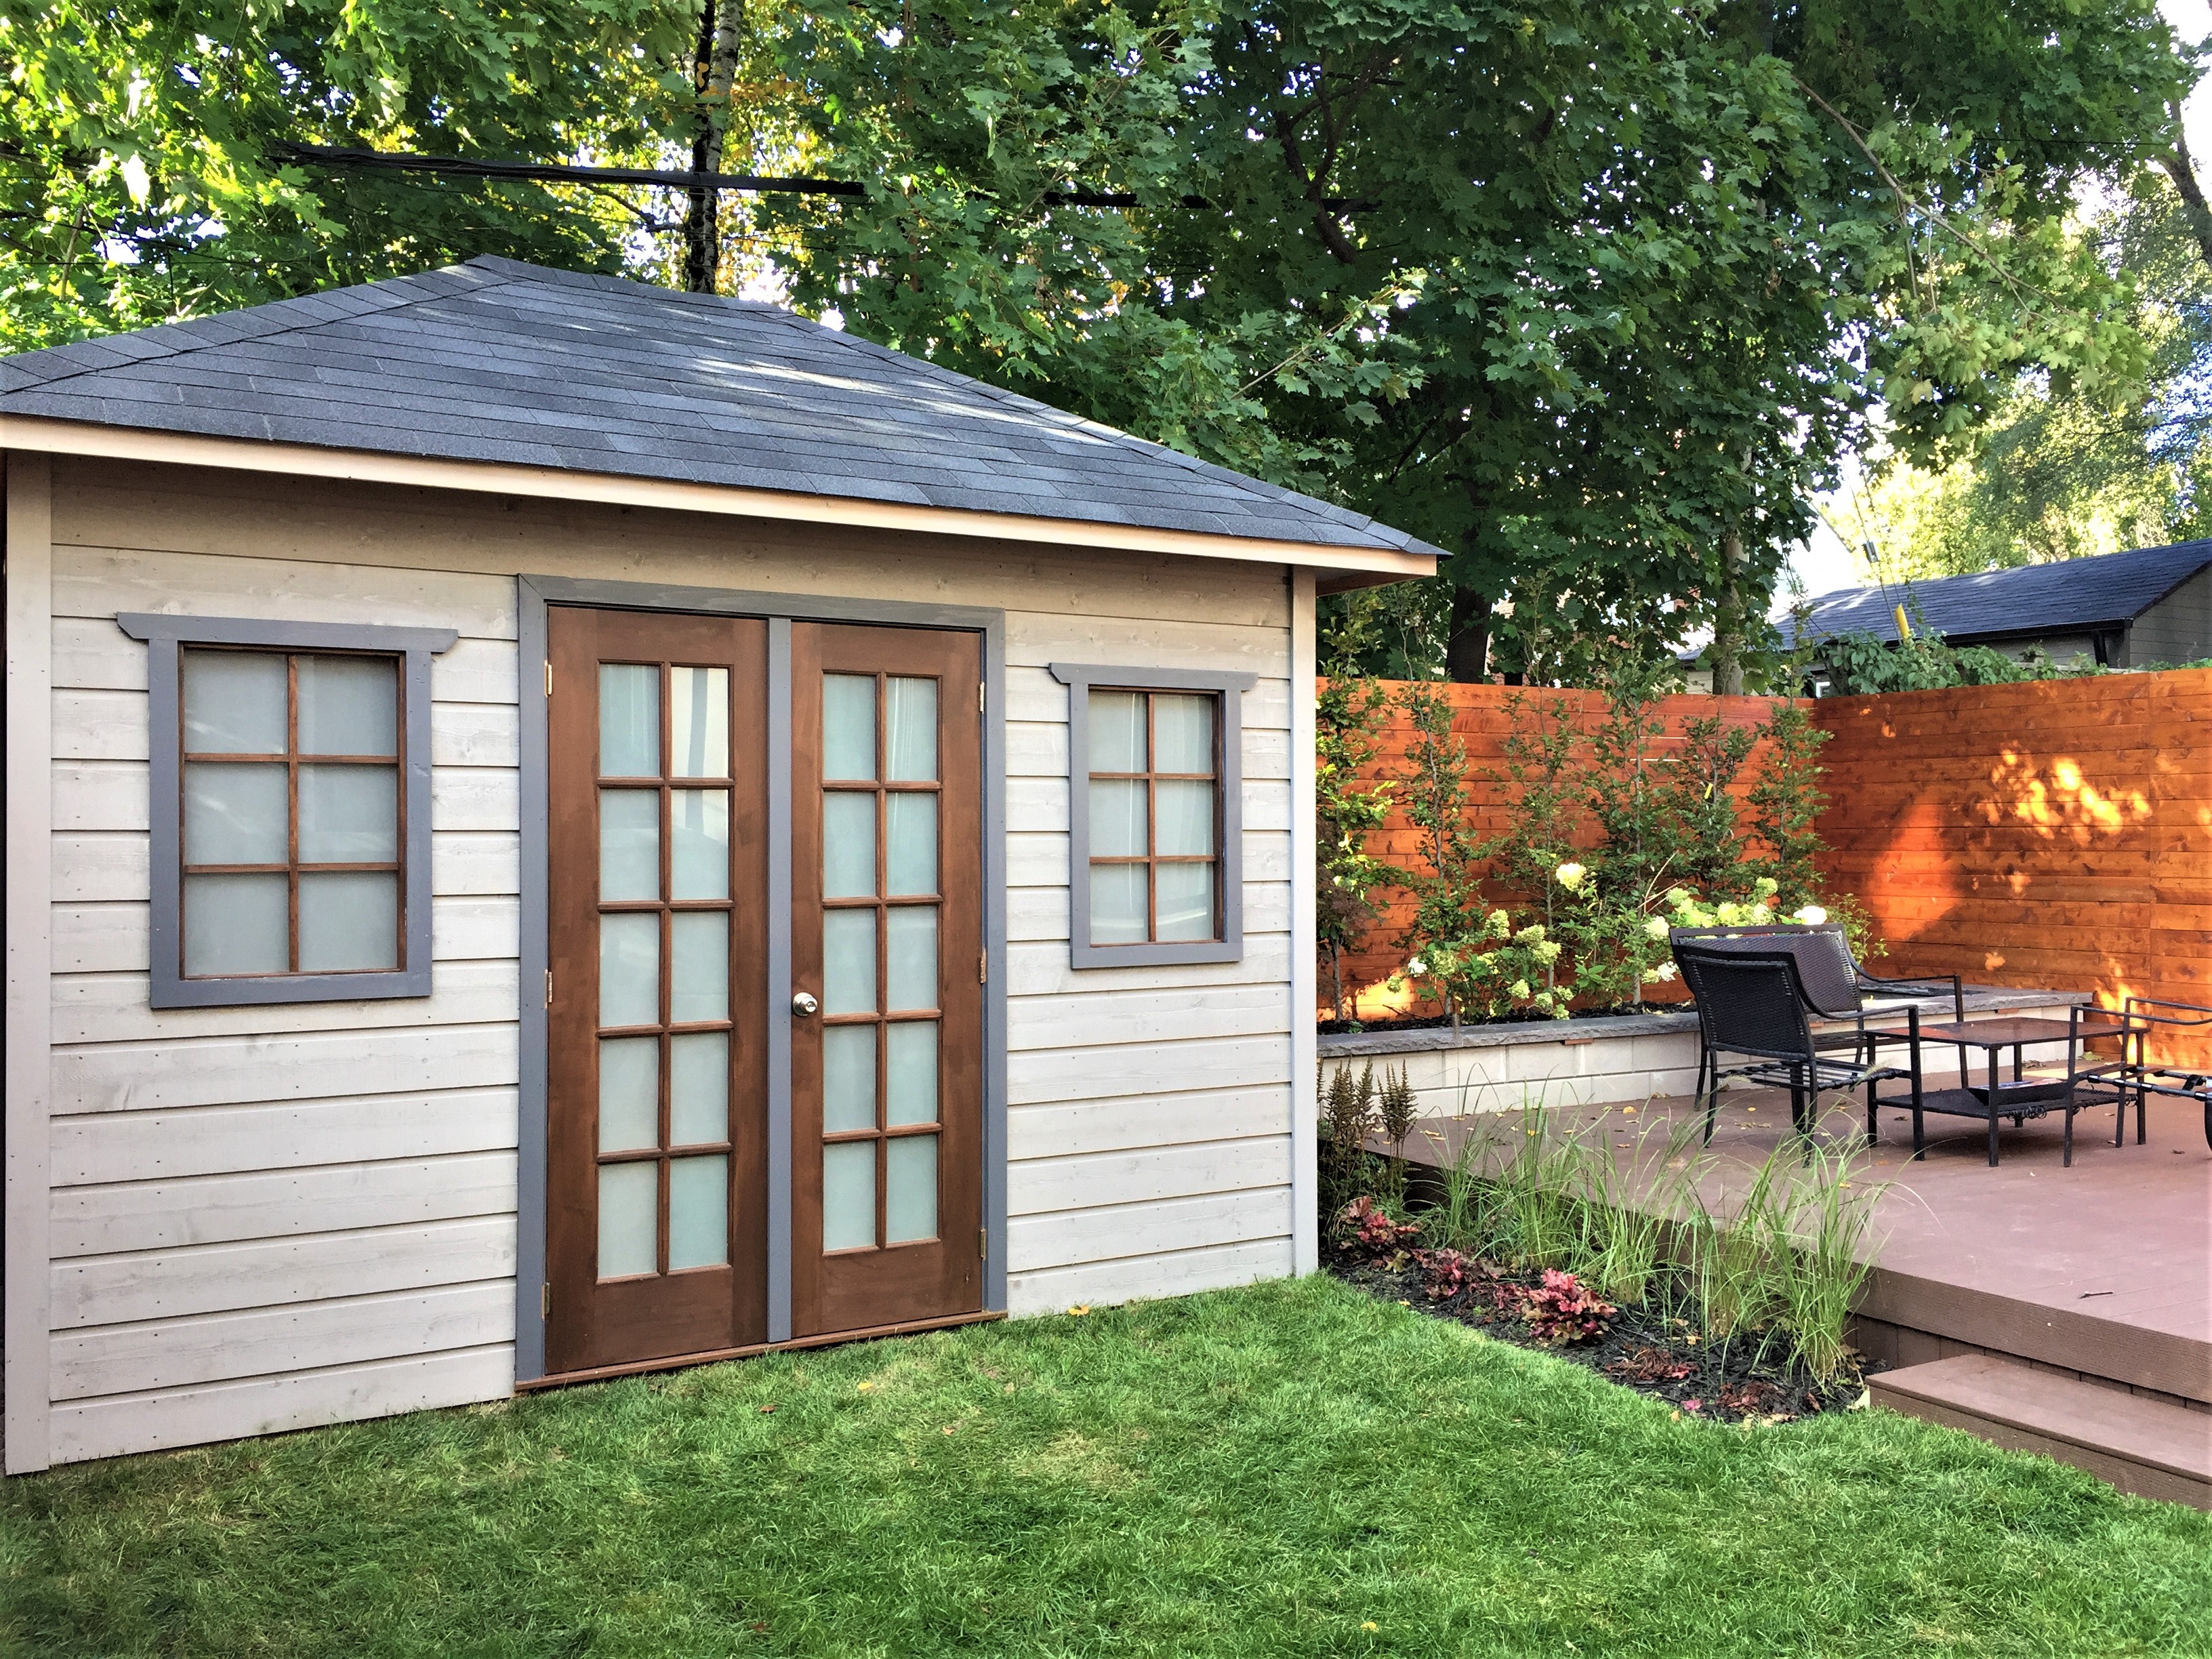 Cedar Sonoma 9x12 garden shed with fixed windows in Toronto Ontario. ID number 232050-1